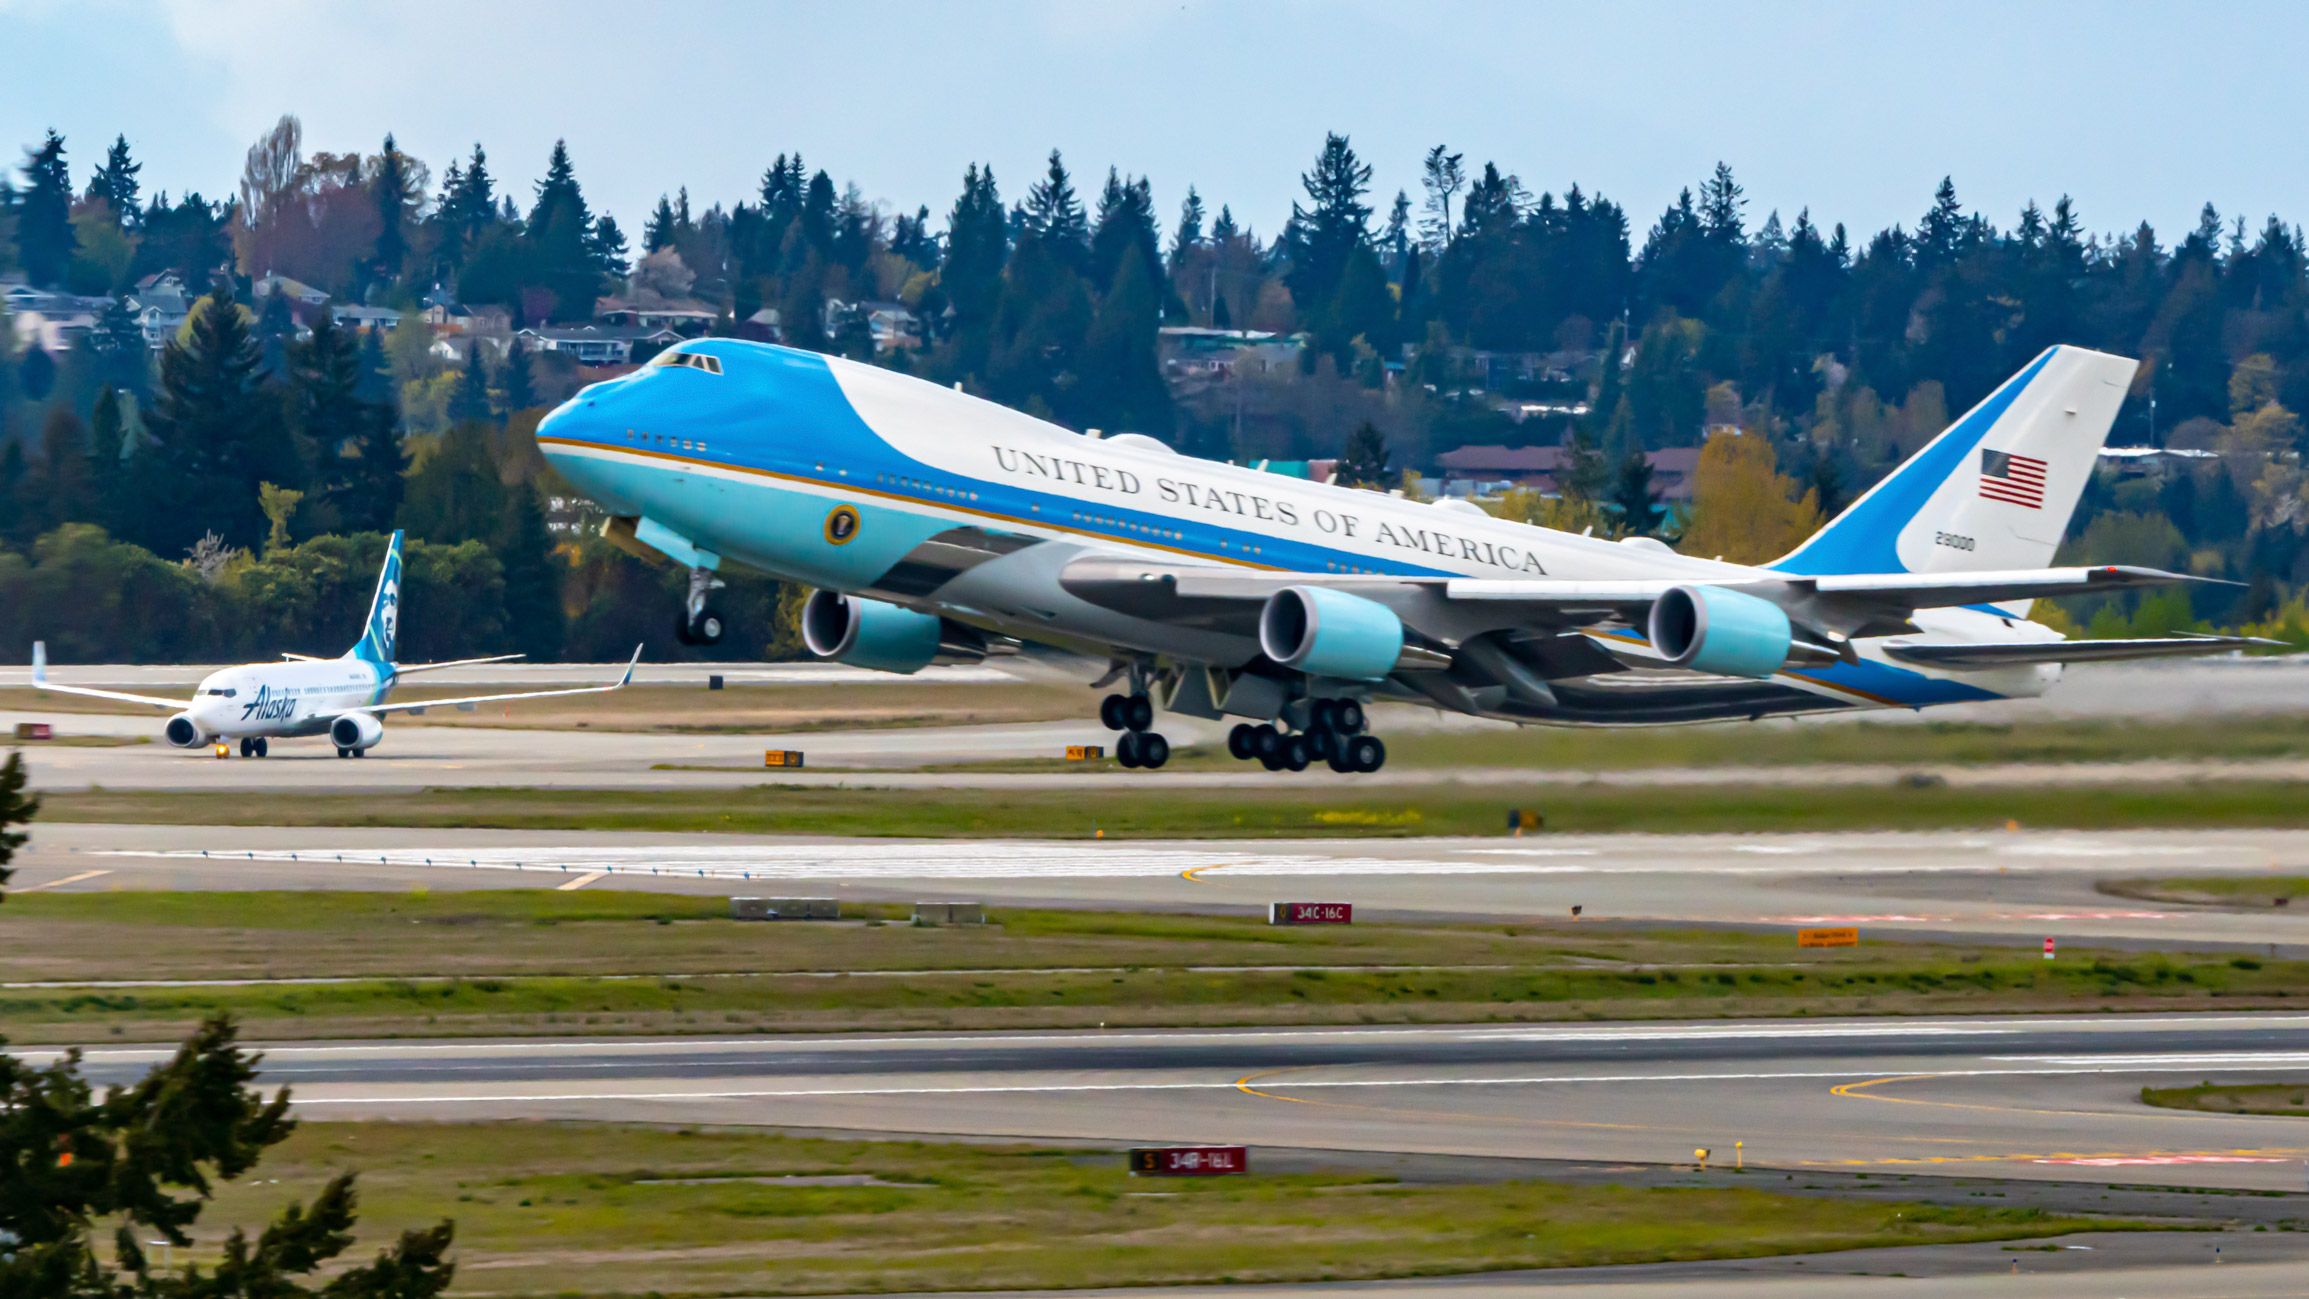 Air Force One Lifting Past An Alaska Airlines Boeing 737-790 at Seattle-Tacoma International Airport